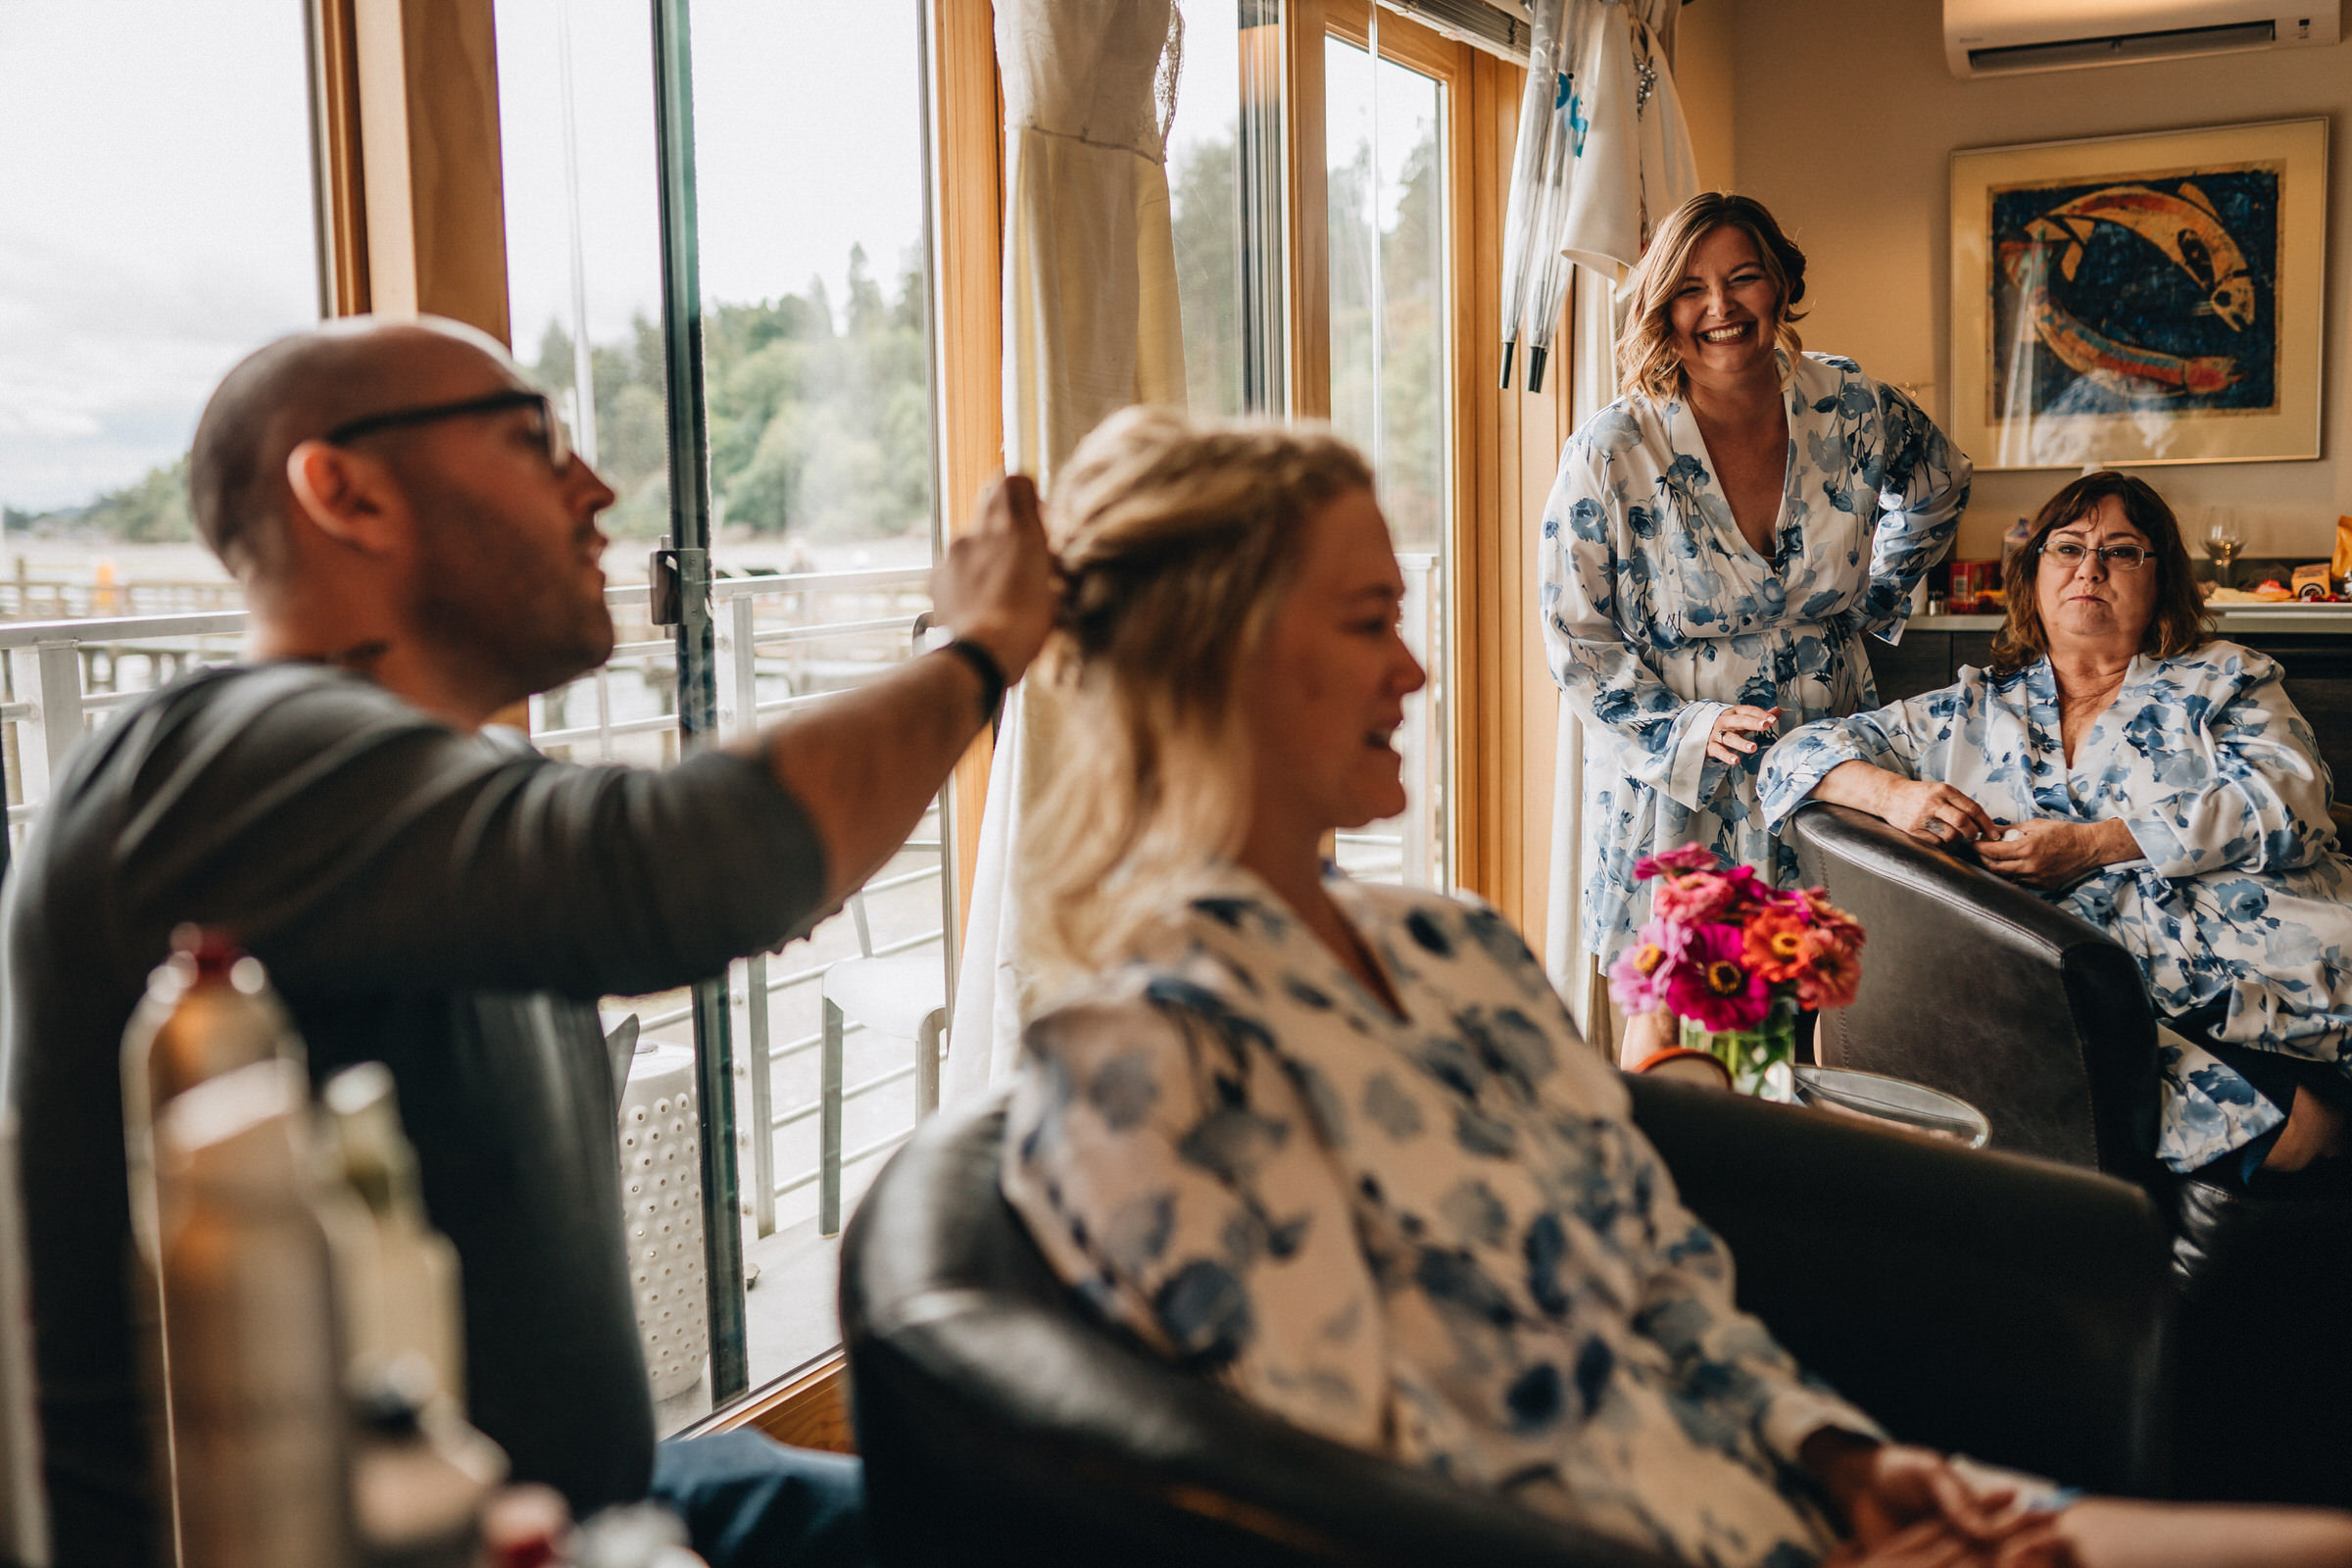 Whidbey Island Wedding: Sara and her ladies chat while getting ready for the wedding at Boatyard Inn